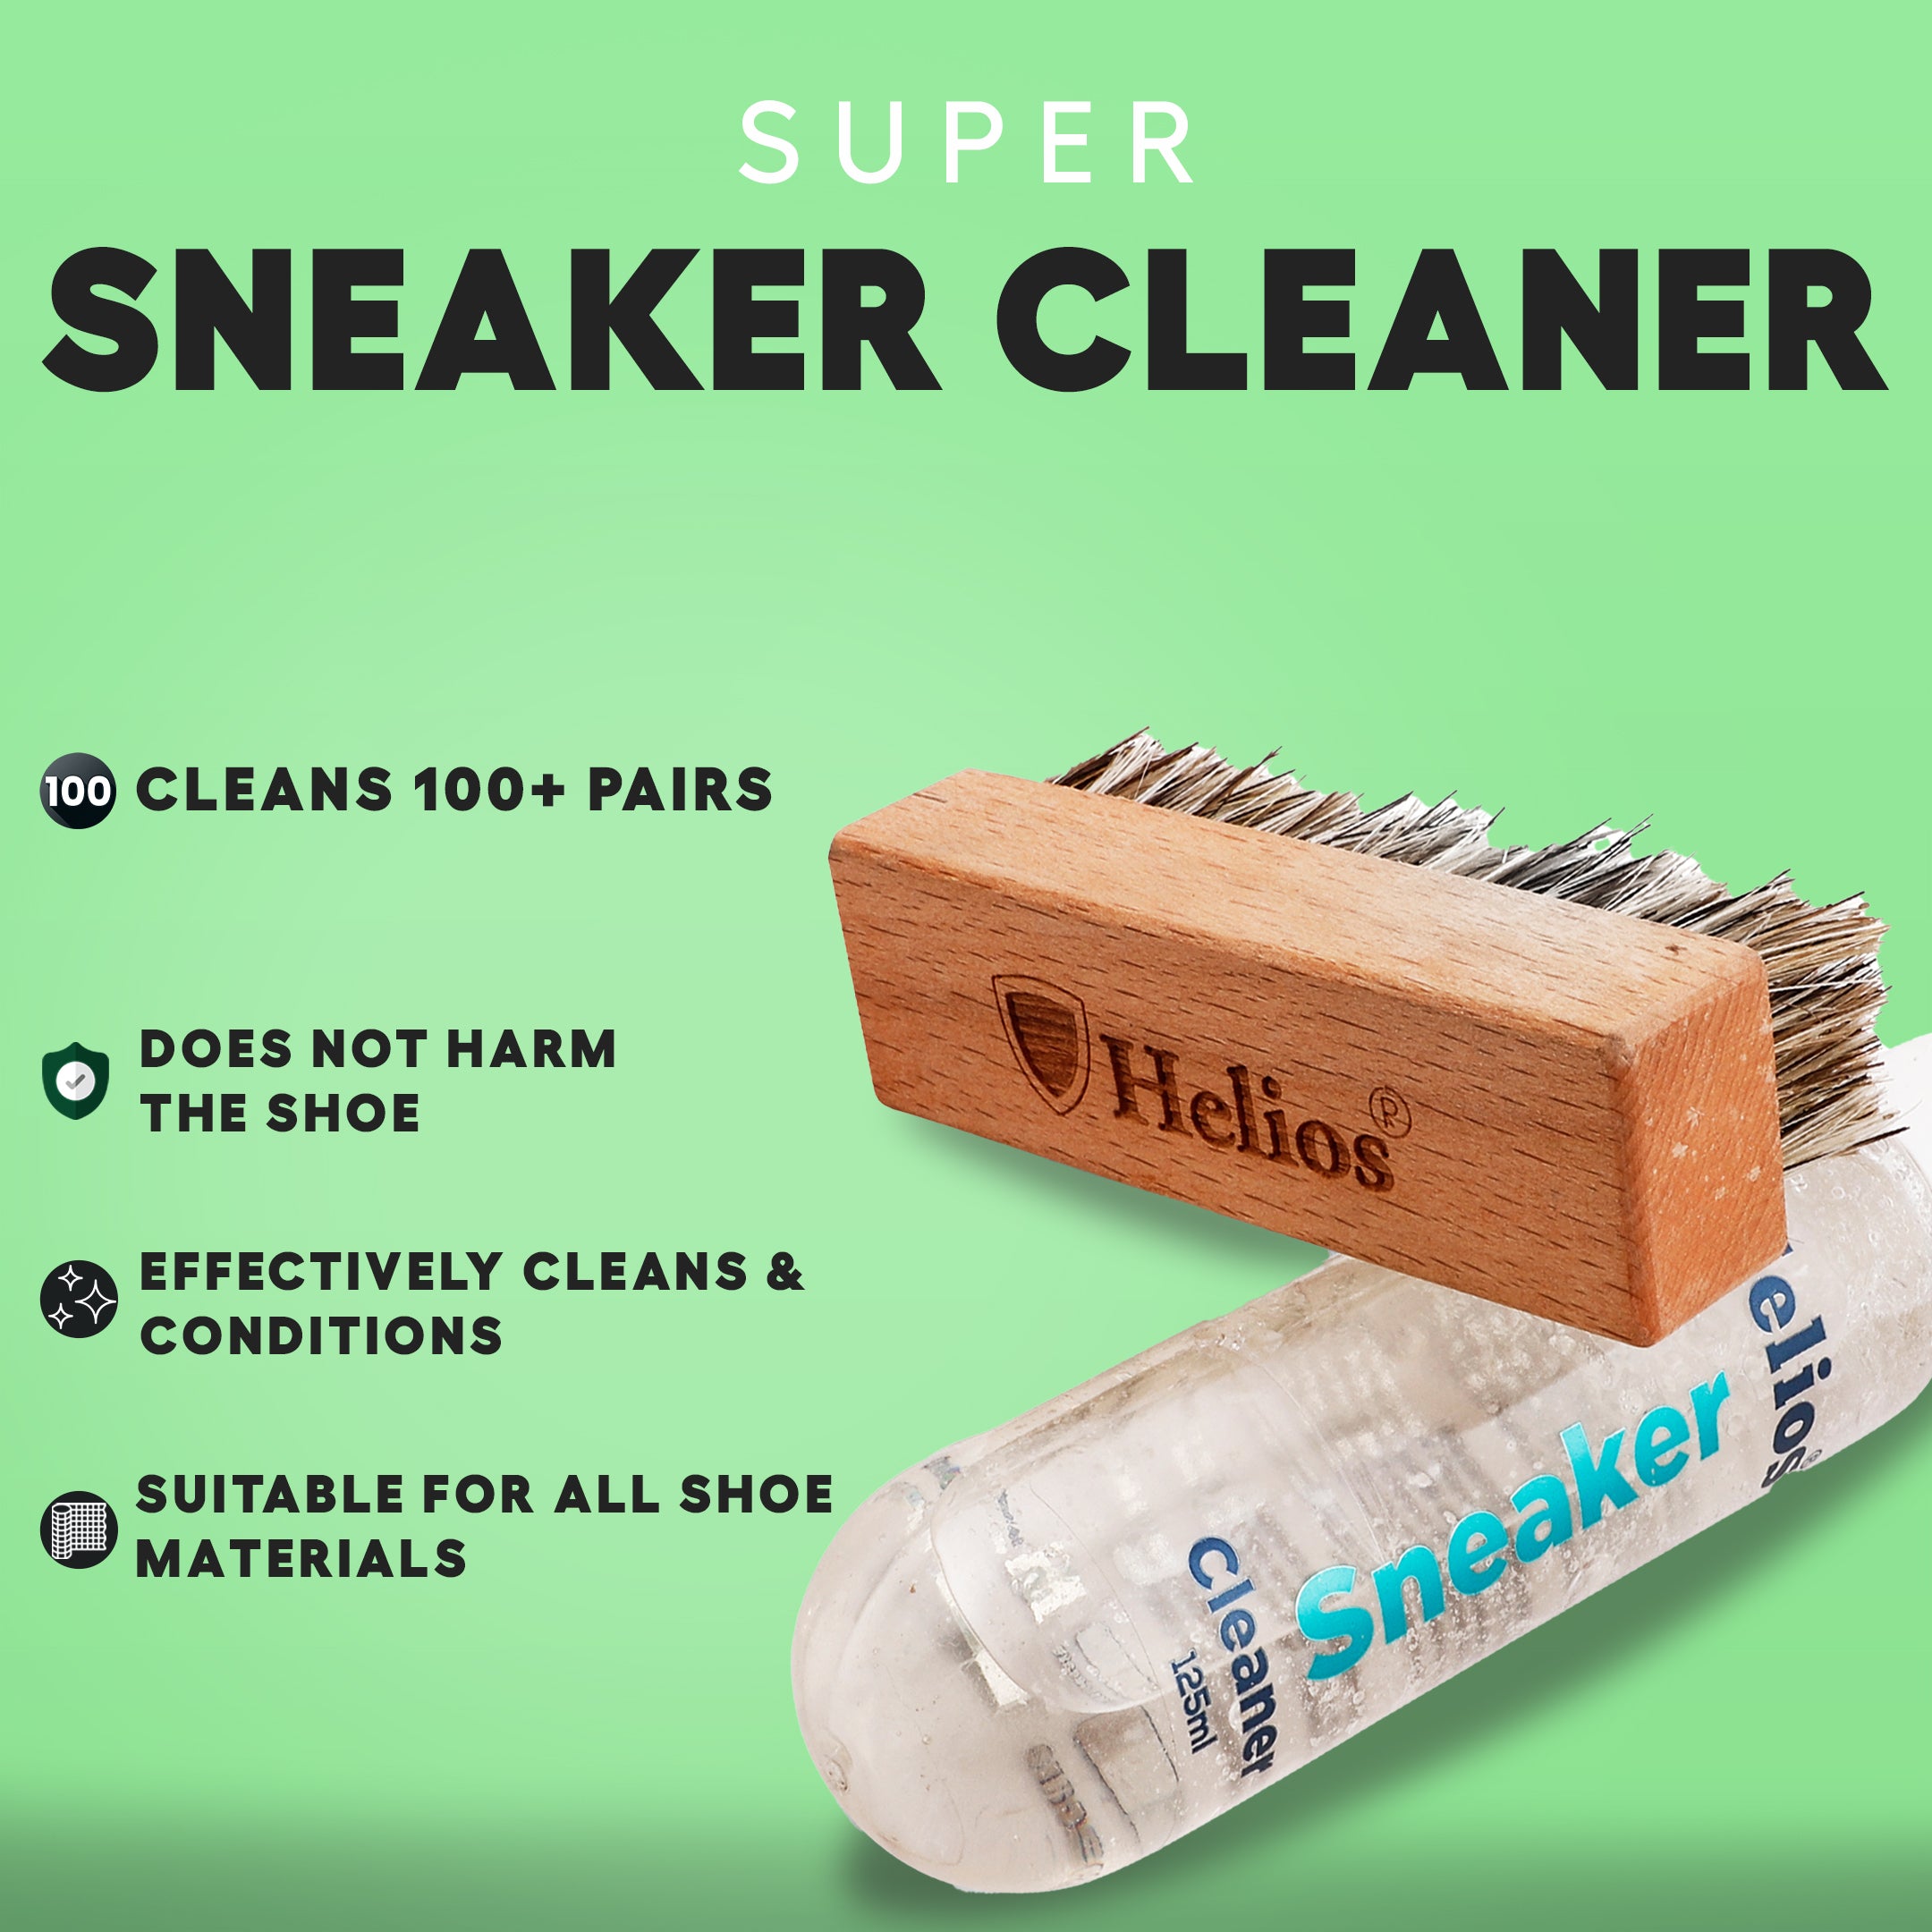 Helios Super Sneaker Cleaner Kit 125 ml with Microfiber Cleaning Cloth | Shoe Cleaning Kit with Microfiber Towel | Shoes Cleaner | Shoe Cleaning Solution with All Purpose Shoe Brush